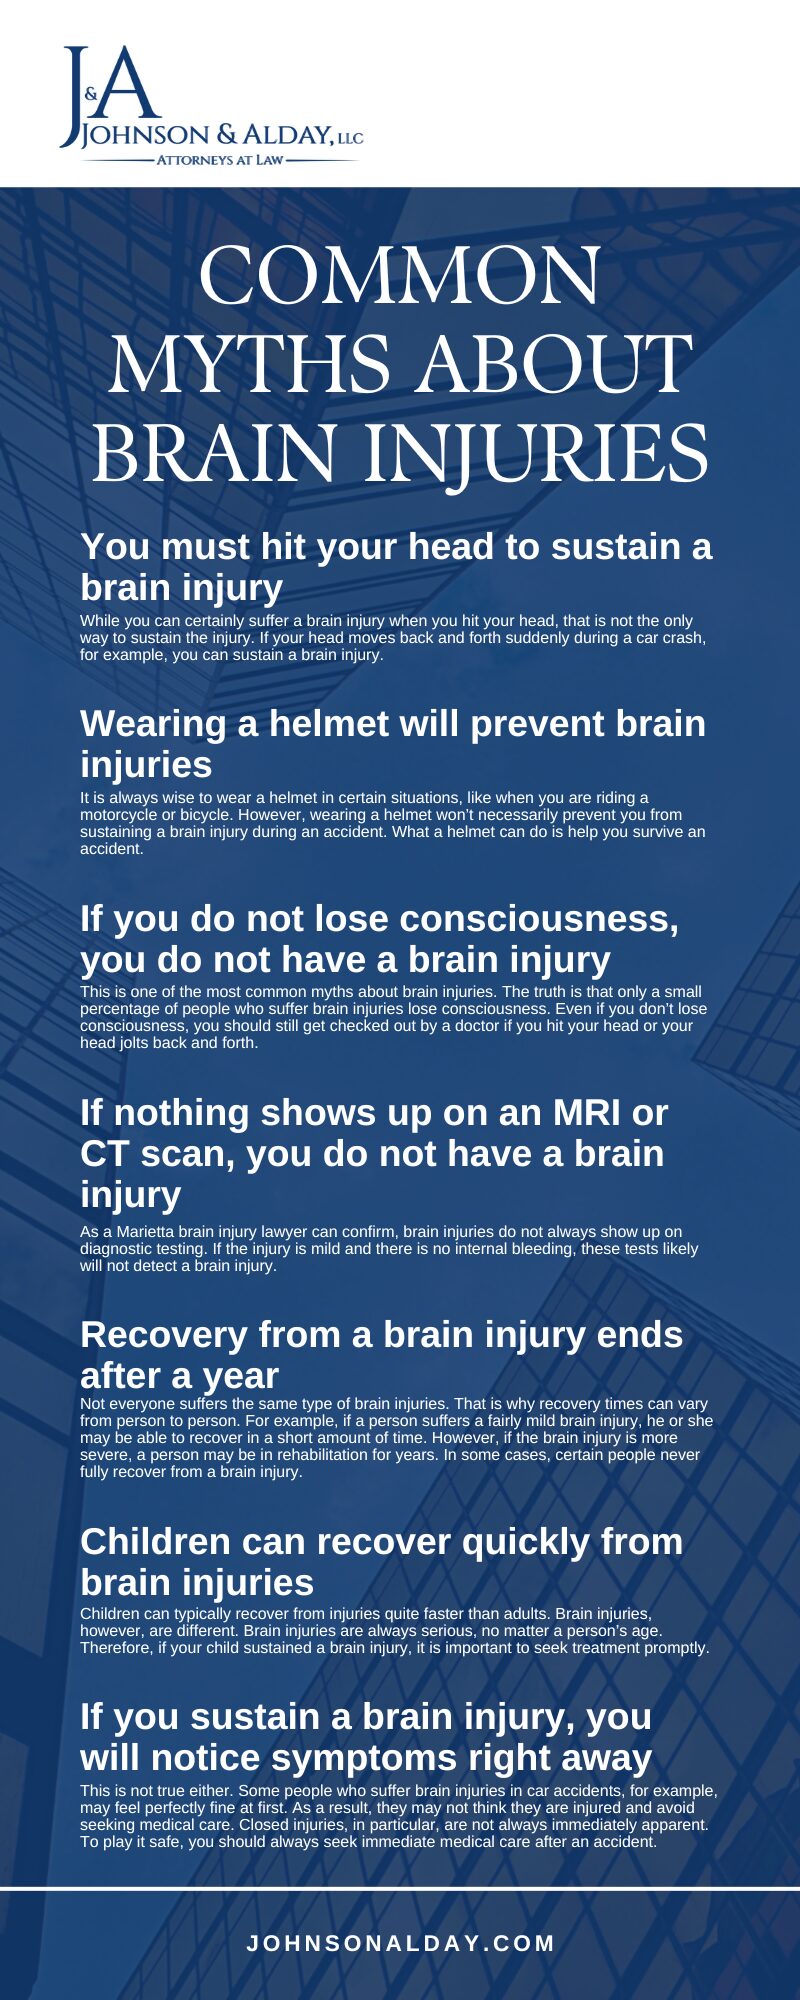 Common Myths About Brain Injuries Infographic